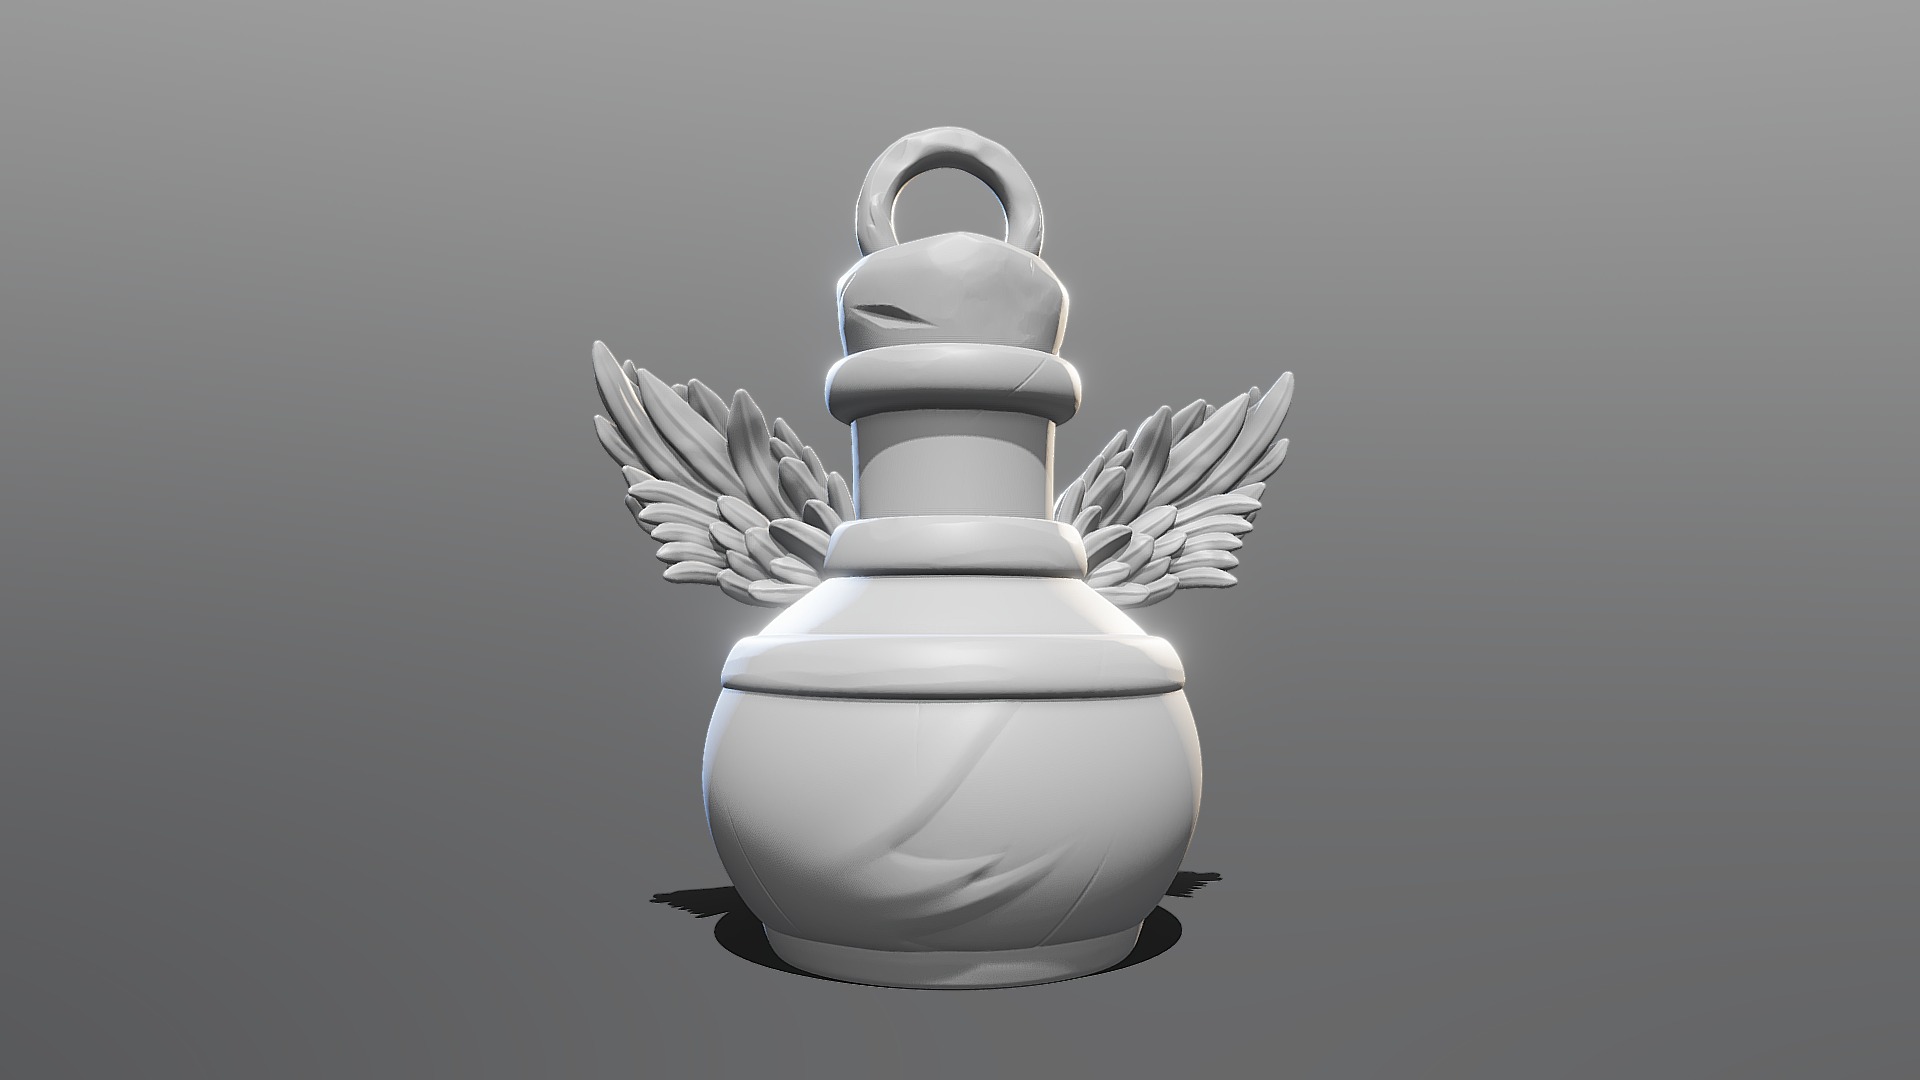 3D model KeyChain Life Potion - This is a 3D model of the KeyChain Life Potion. The 3D model is about a white vase with feathers.